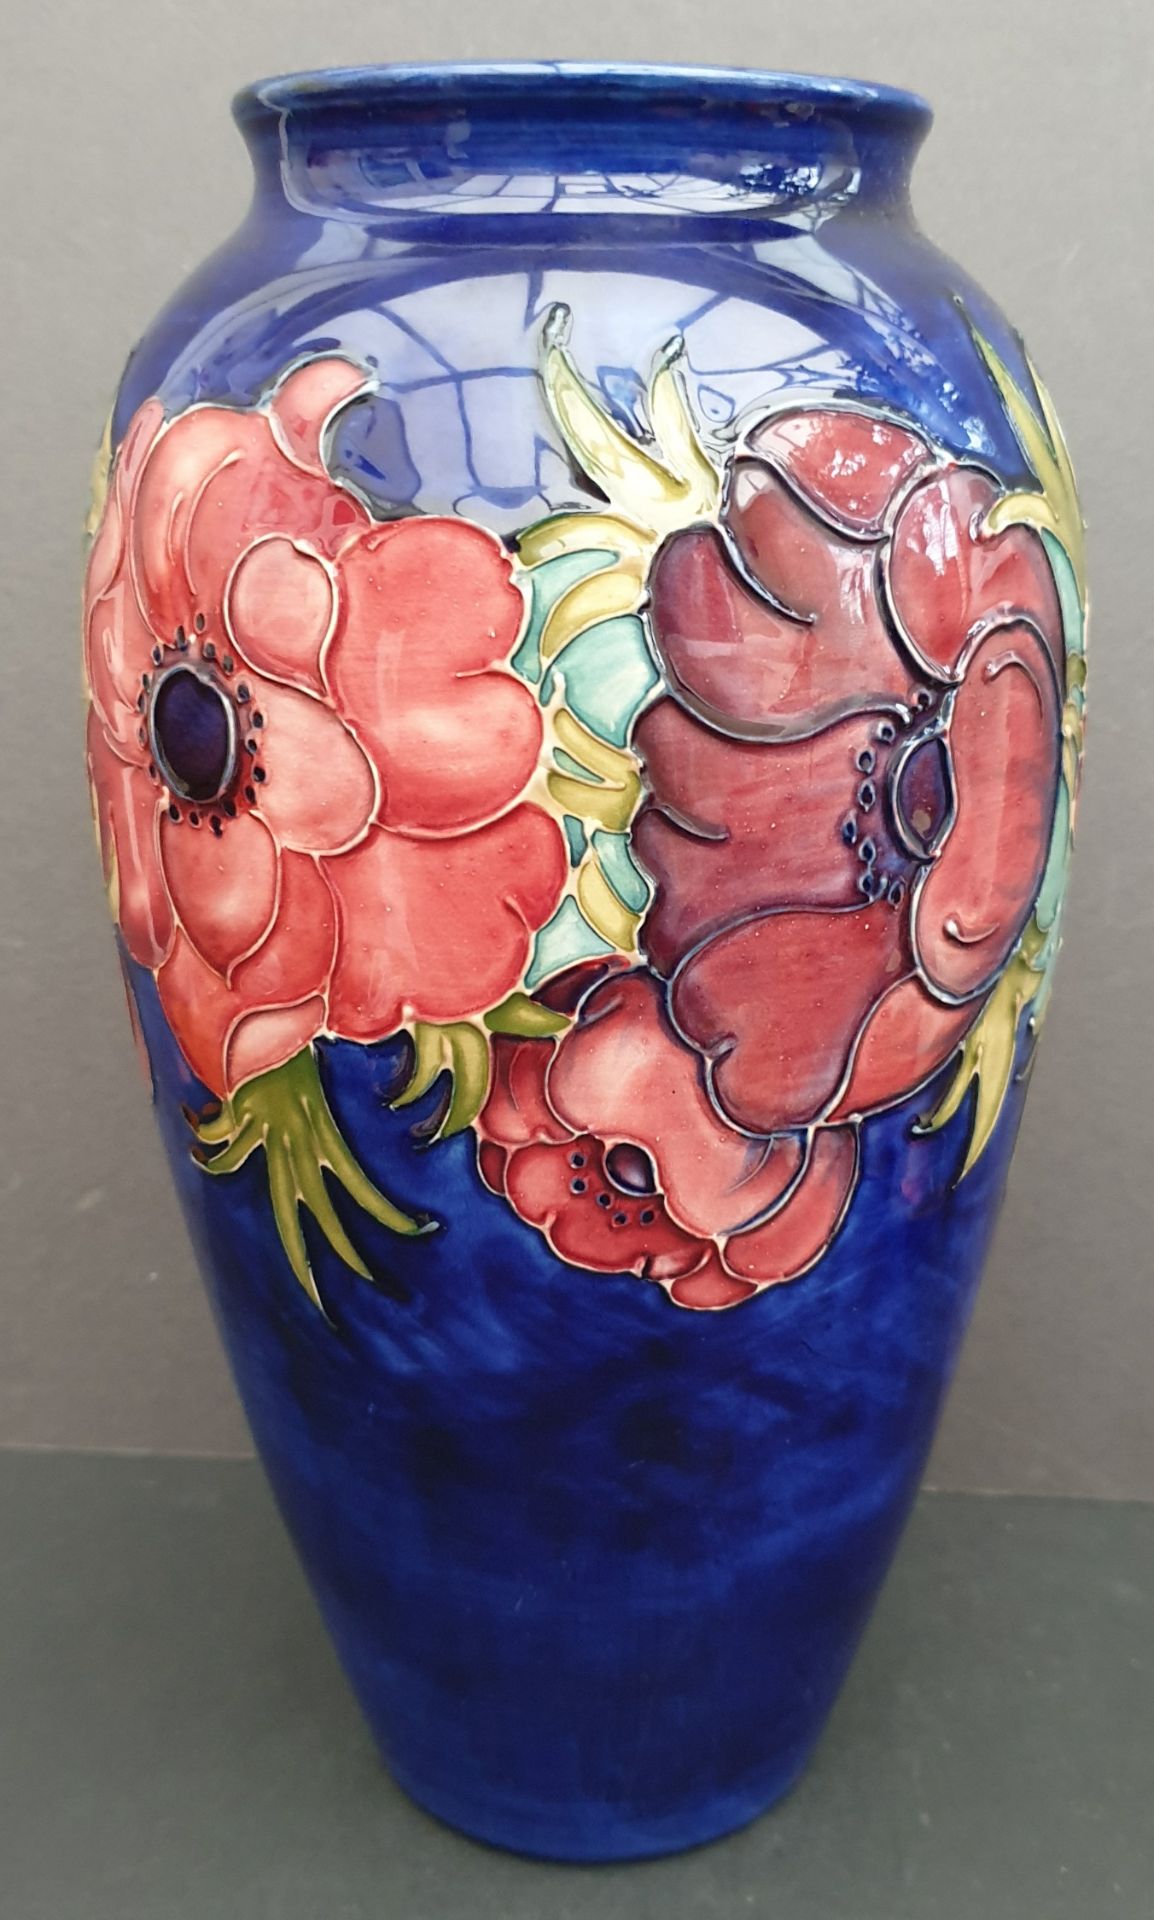 Vintage Collectable Moorcroft Vase 32cm Tall Blue Ground Assorted Flower Designs. Part of a recent